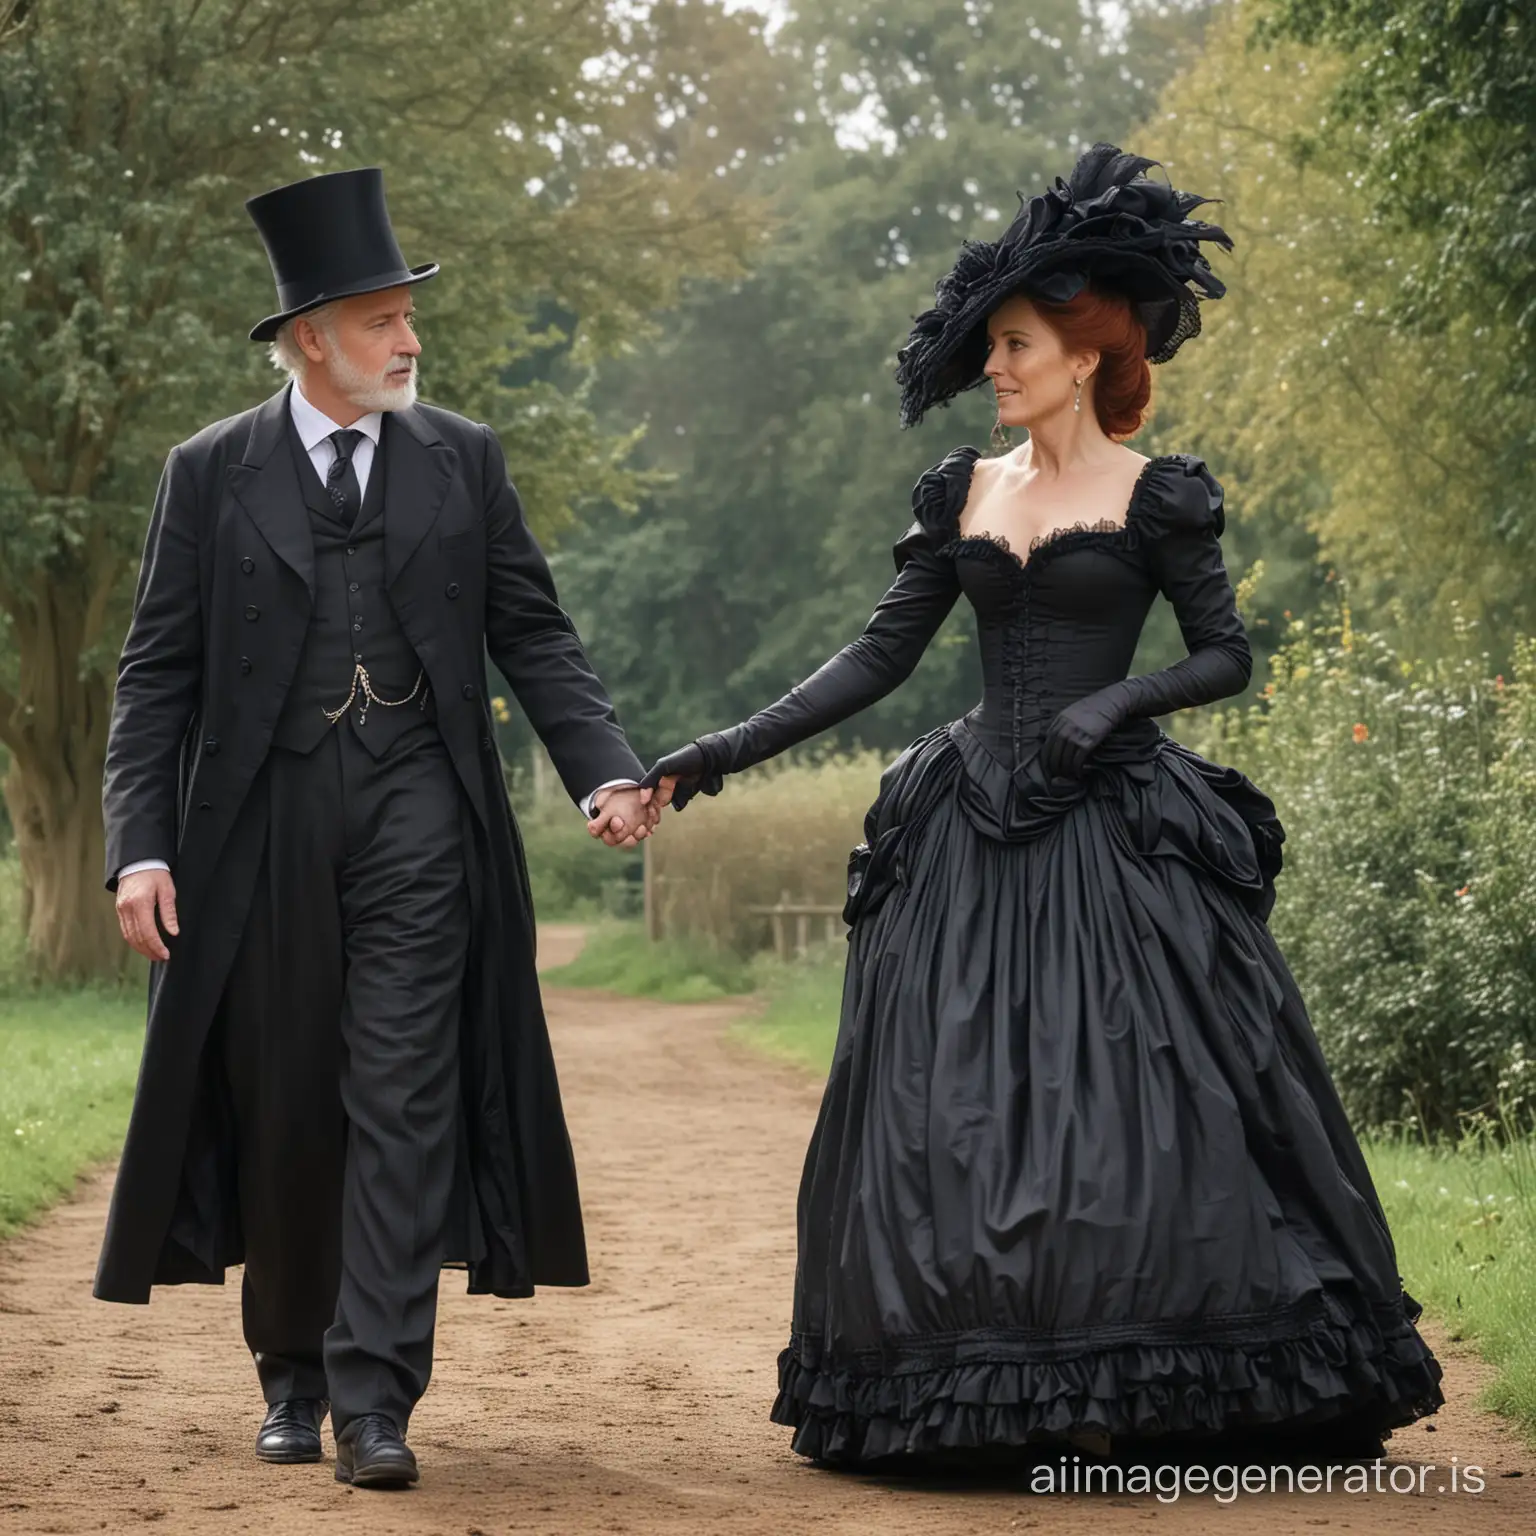 Victorian-Newlyweds-Strolling-Elegant-Redhaired-Bride-and-Dapper-Groom